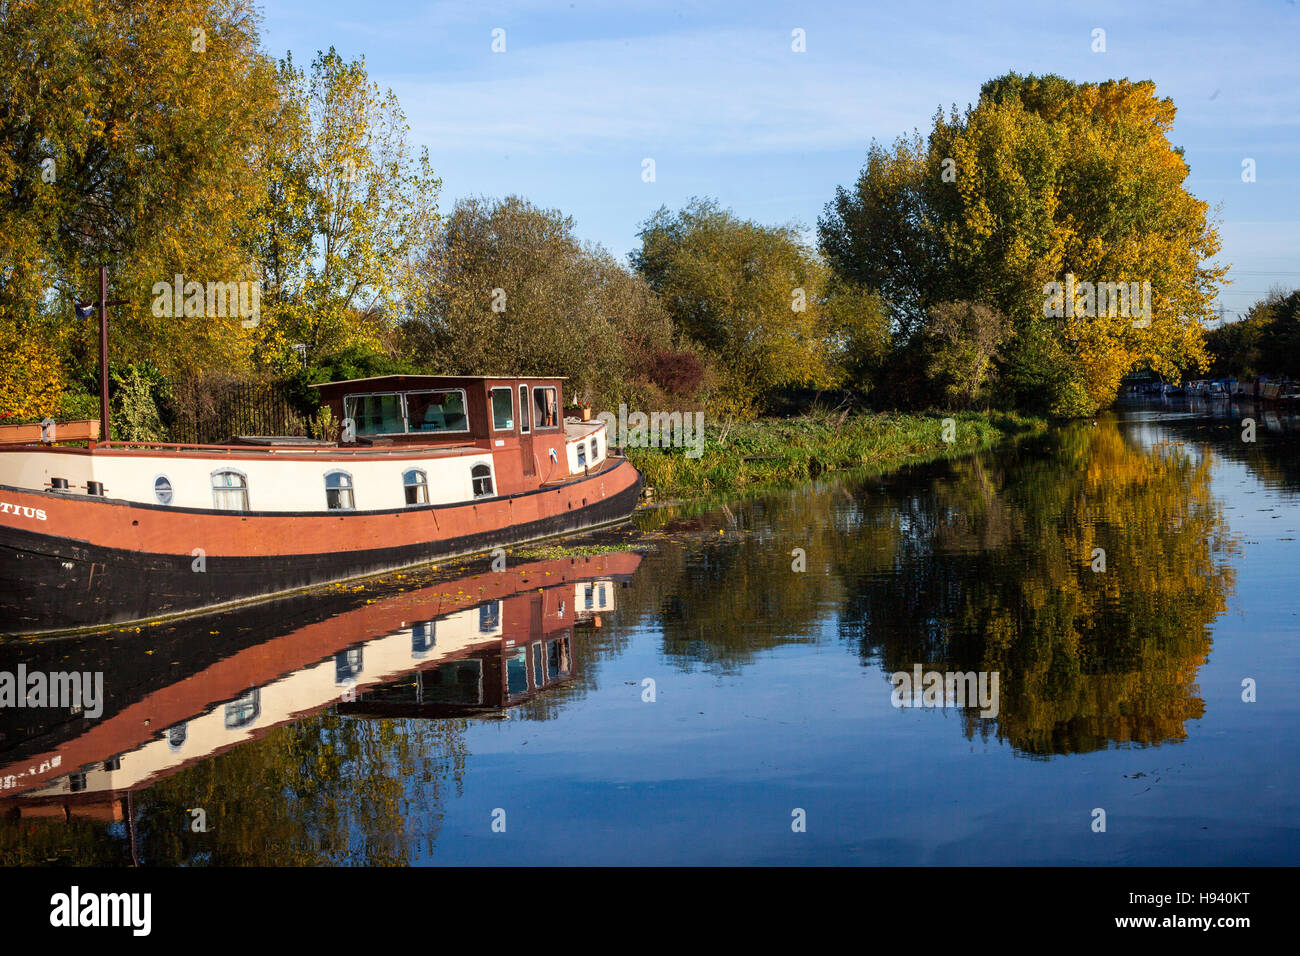 Boat reflections on the River Lea Stock Photo